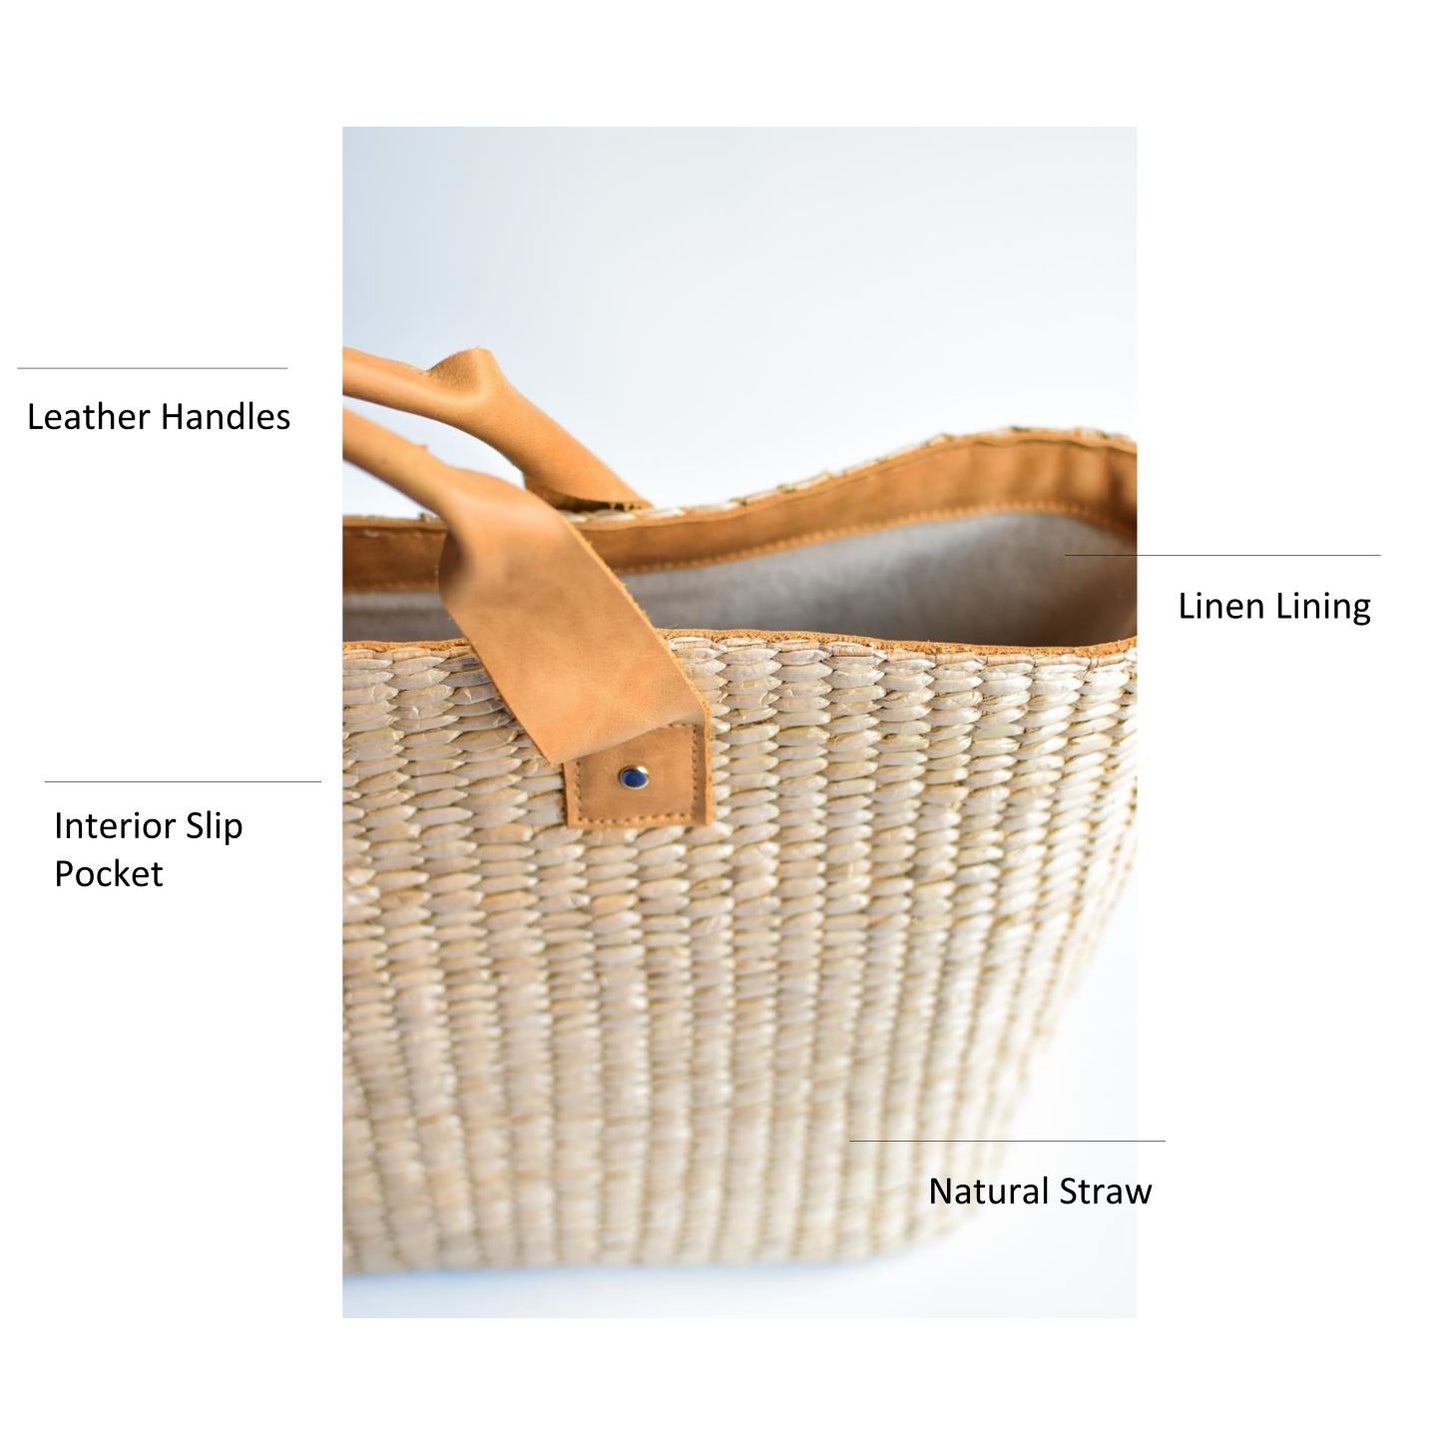 Large straw tote bag finished with natural leather handles and linen lining.